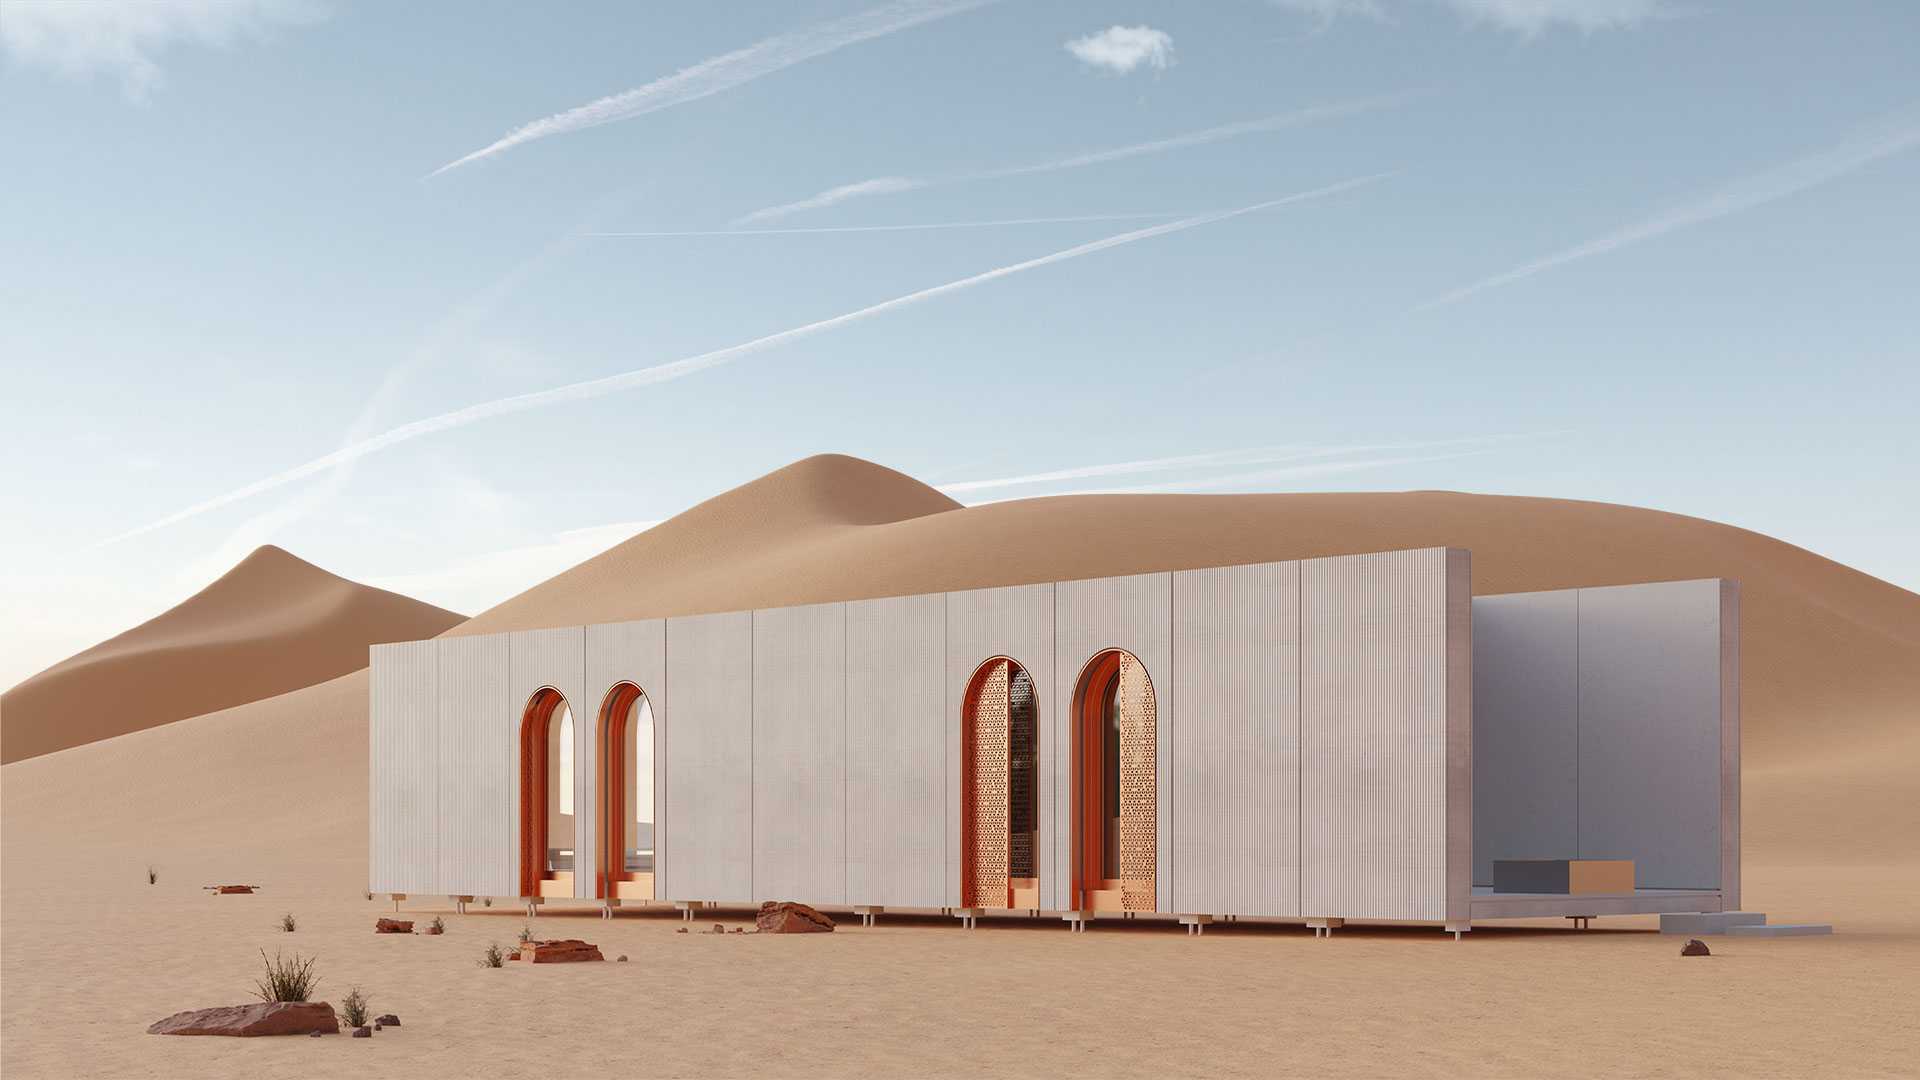 Architecture visualization of ecolodge in desert